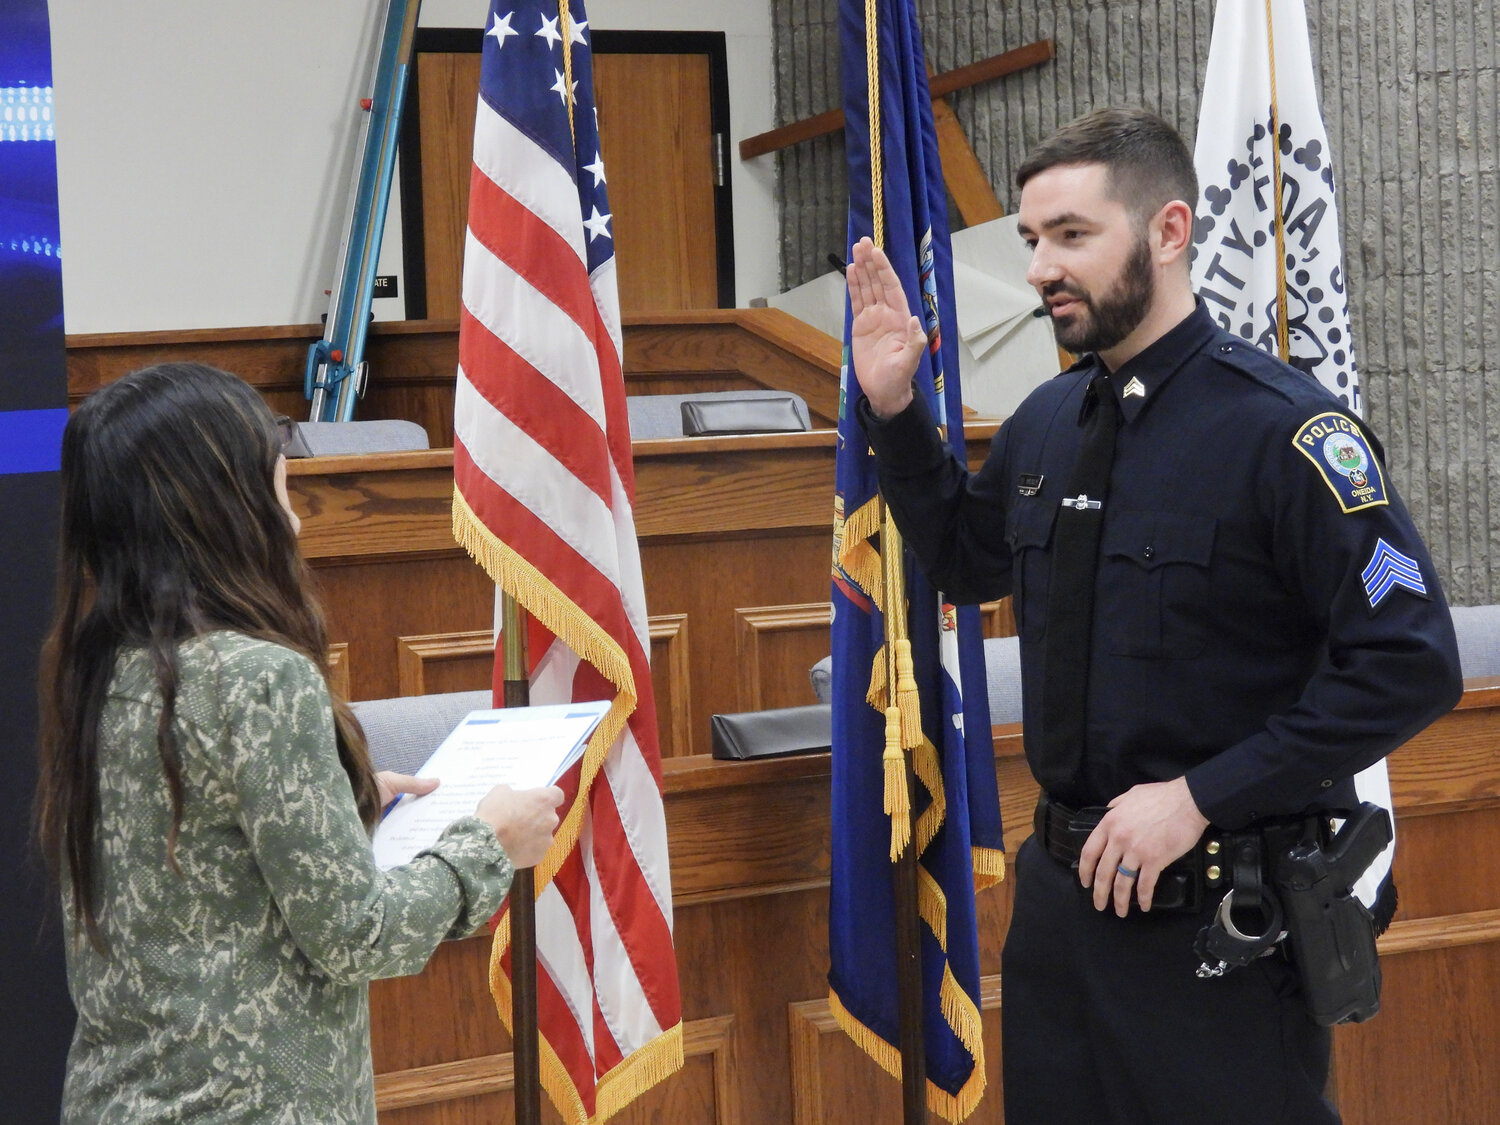 Sergeant Tyler Witchley takes takes his oath at a swearing-in ceremony in the Oneida Common Council on Thursday, March 9. Witchley was an infantryman for the United States Army from 2011 to 2014, serving a tour of duty in Afghanistan. He's received the Chief's Letter of Recommendation on multiple occasions and has been recognized by the Madison County Stop DWI program for his efforts to stop drunk and impaired driving